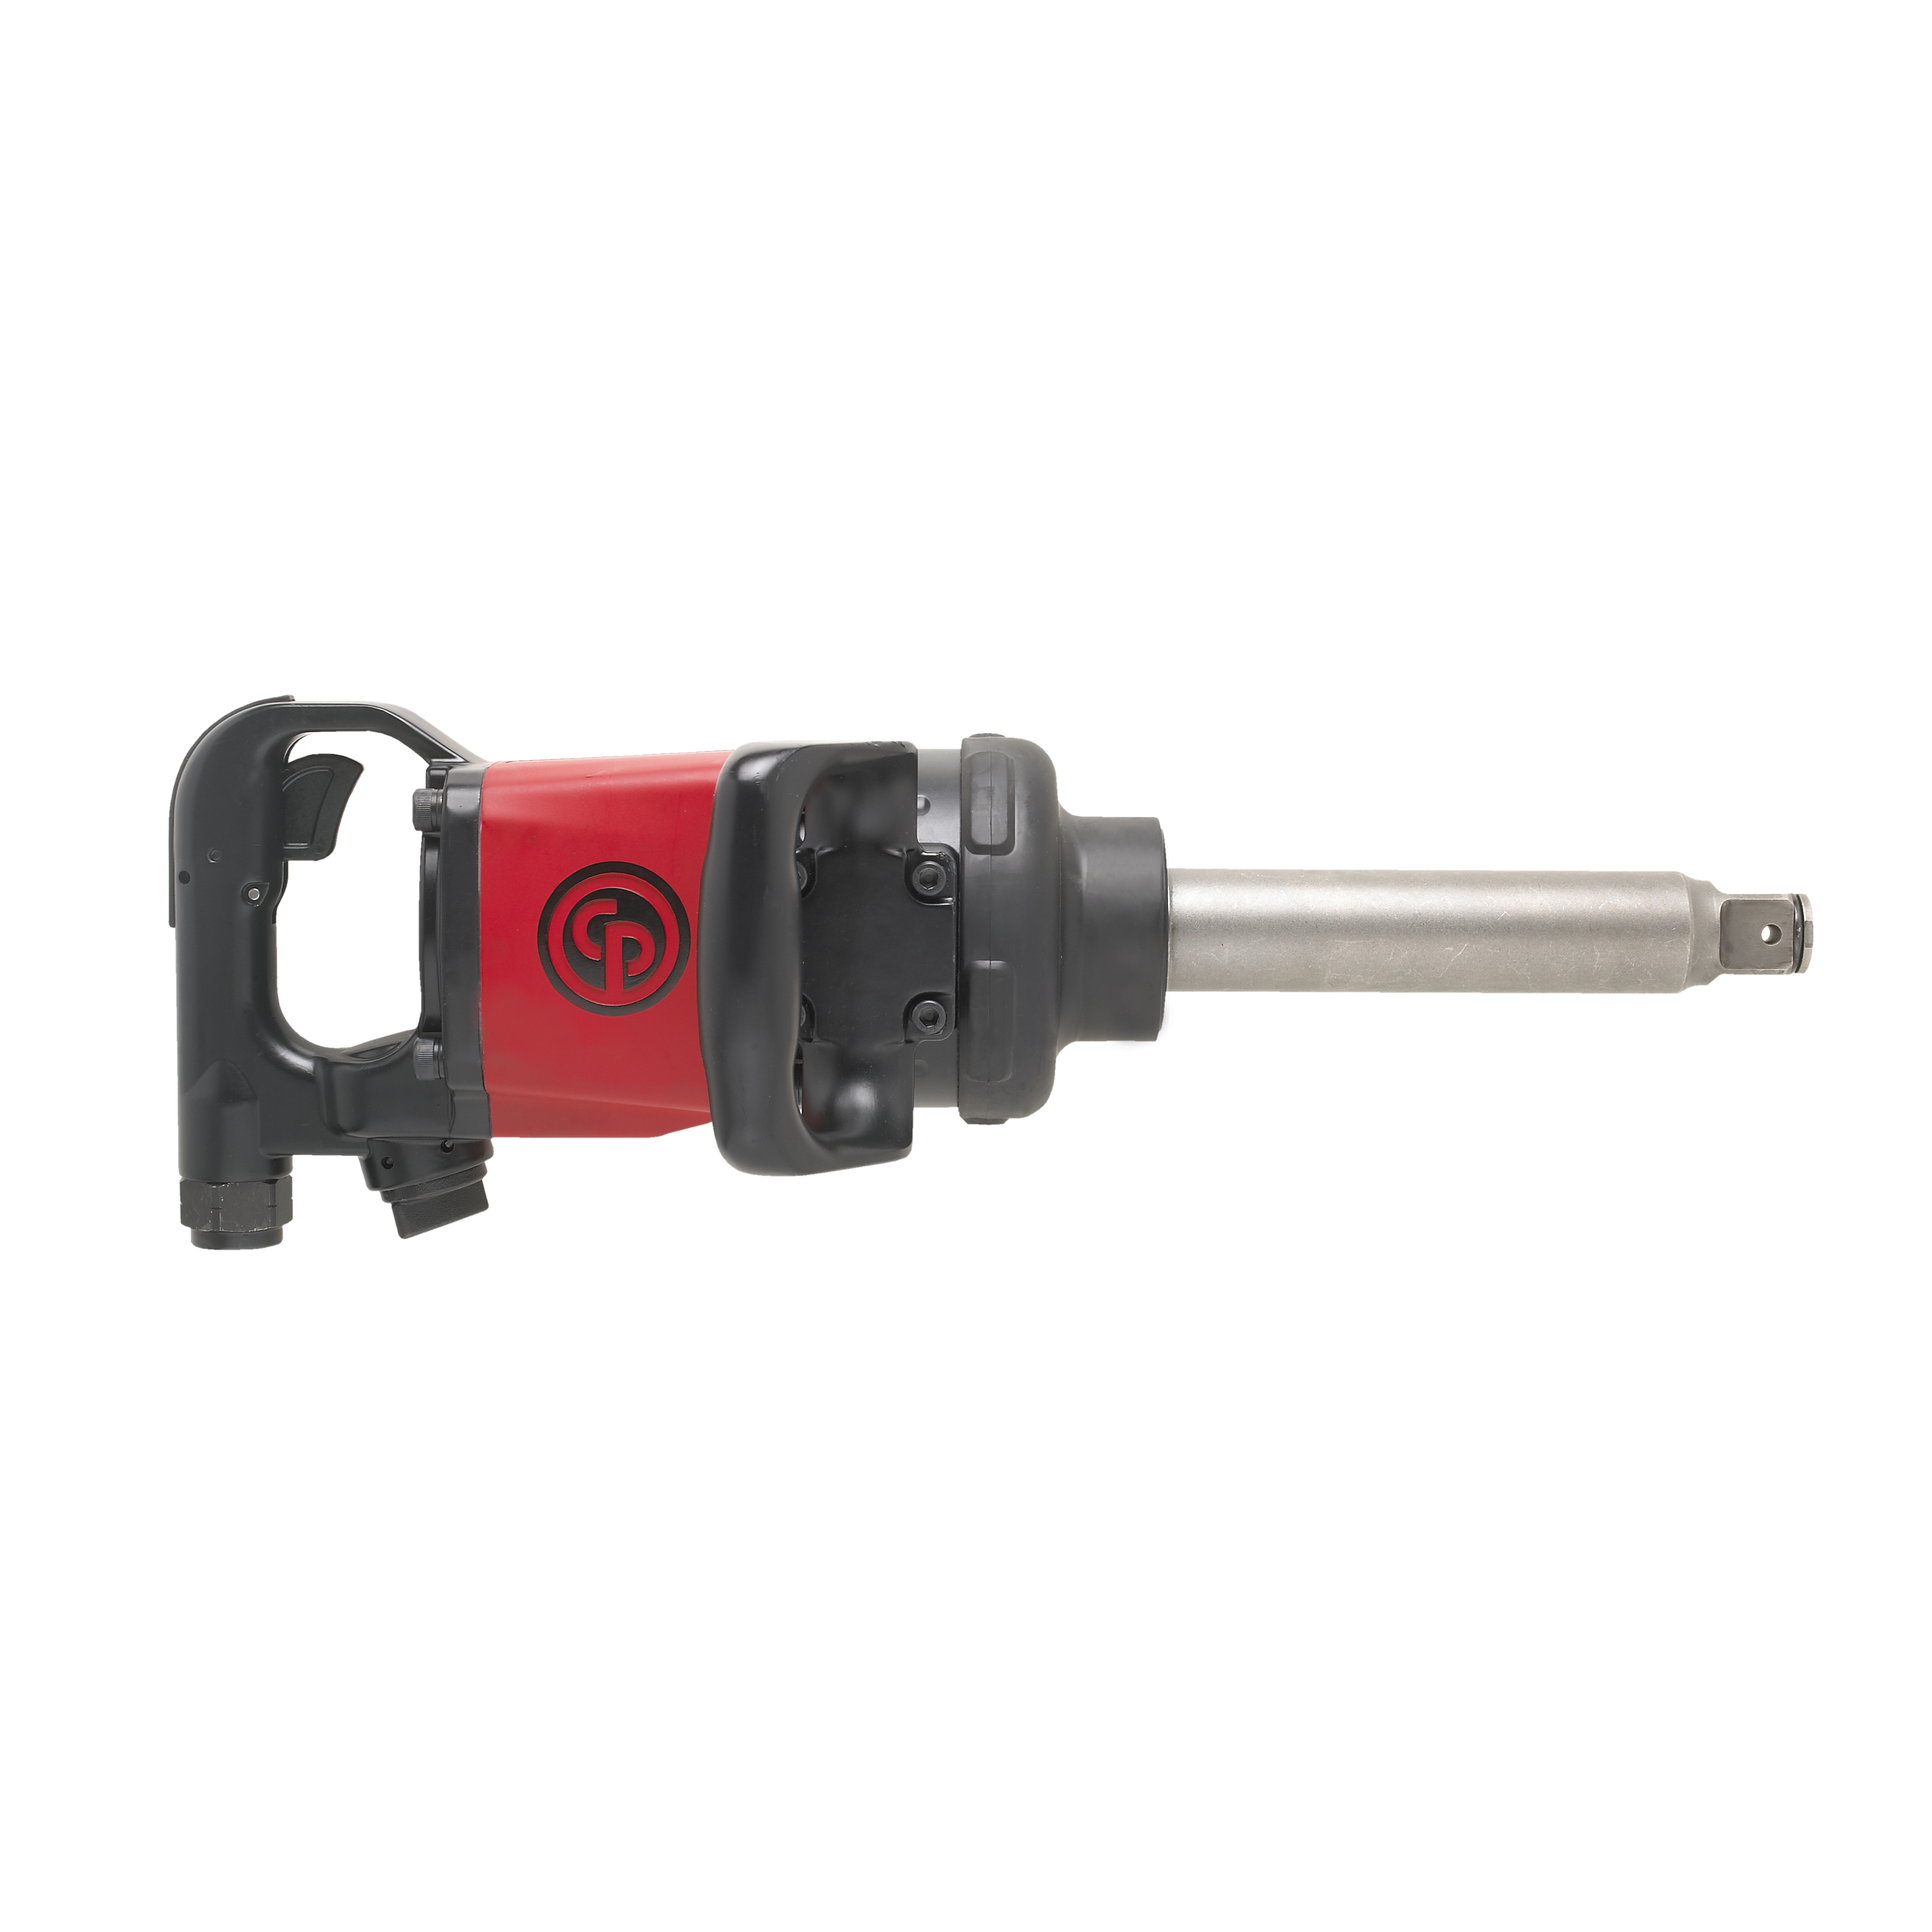 1"DR CP7782-6 Impact Wrench 2140ft.lbs}